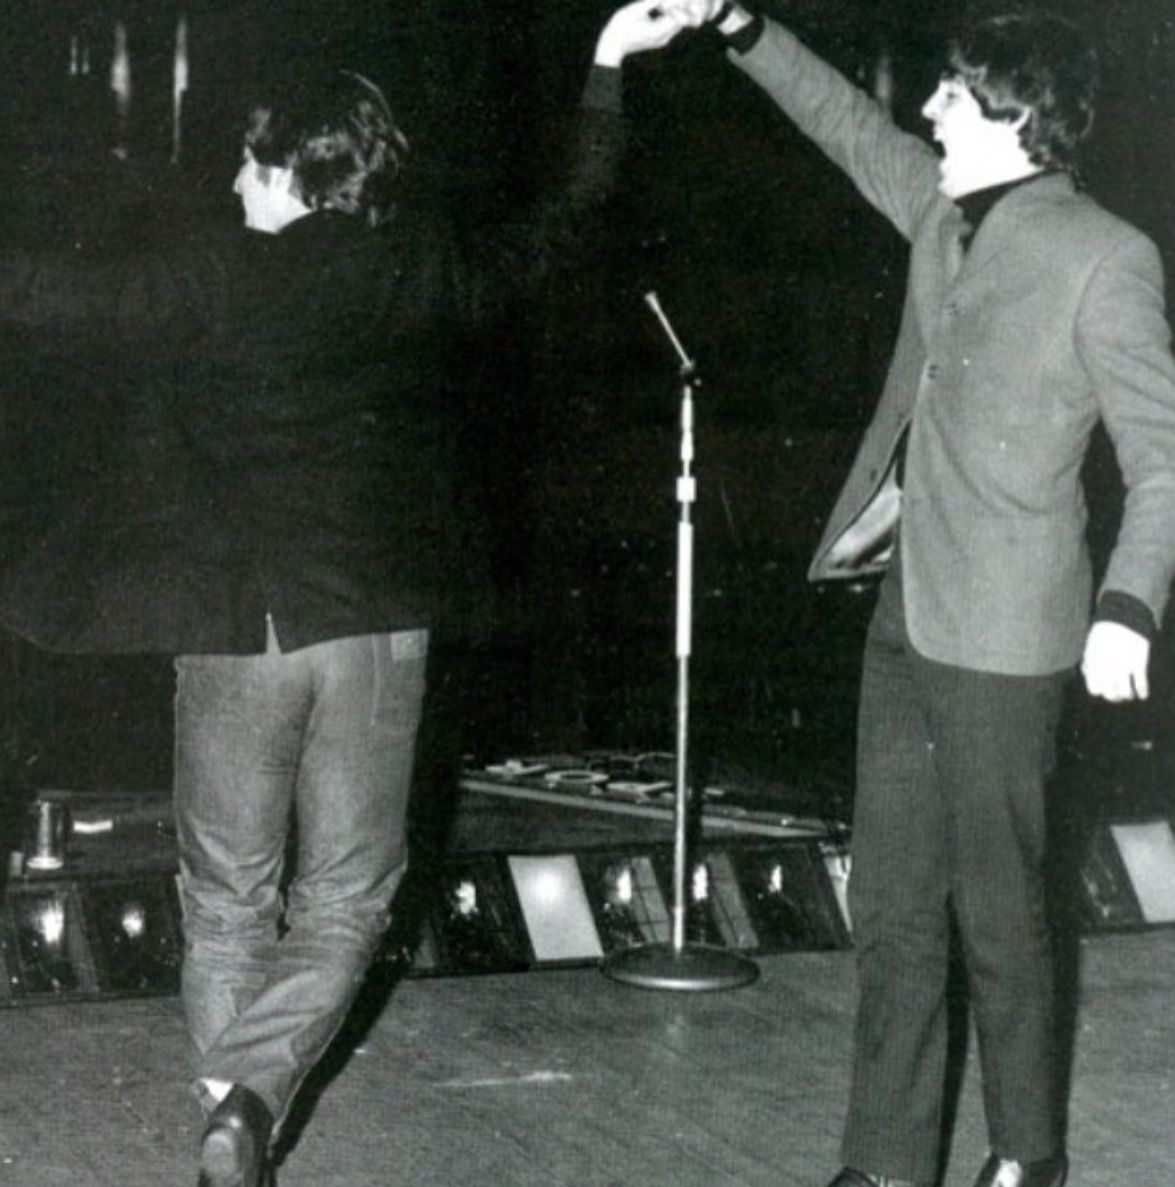 ok so to begin we have to talk about john and paul's relationship before 1968. it's difficult to overstate how close they were in this period. they are best friends, songwriting partners, bandmates. i mean, they're fucking Lennon-and-McCartney. what more is there to say.